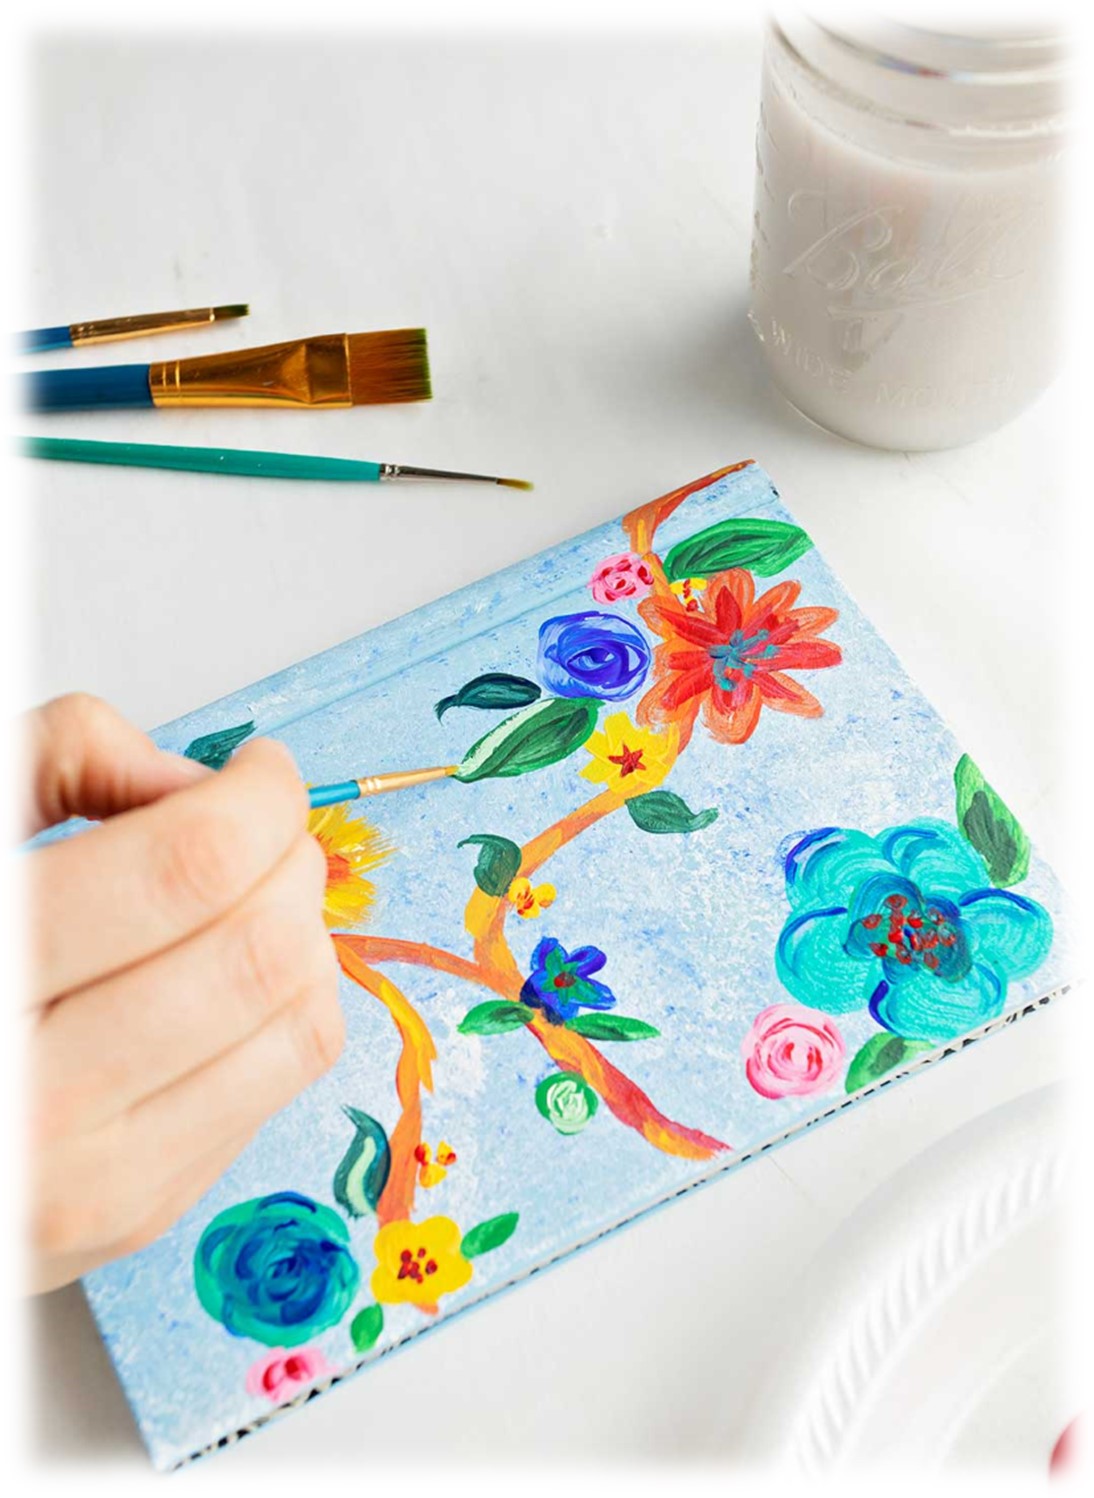 Book being painted with flowers.